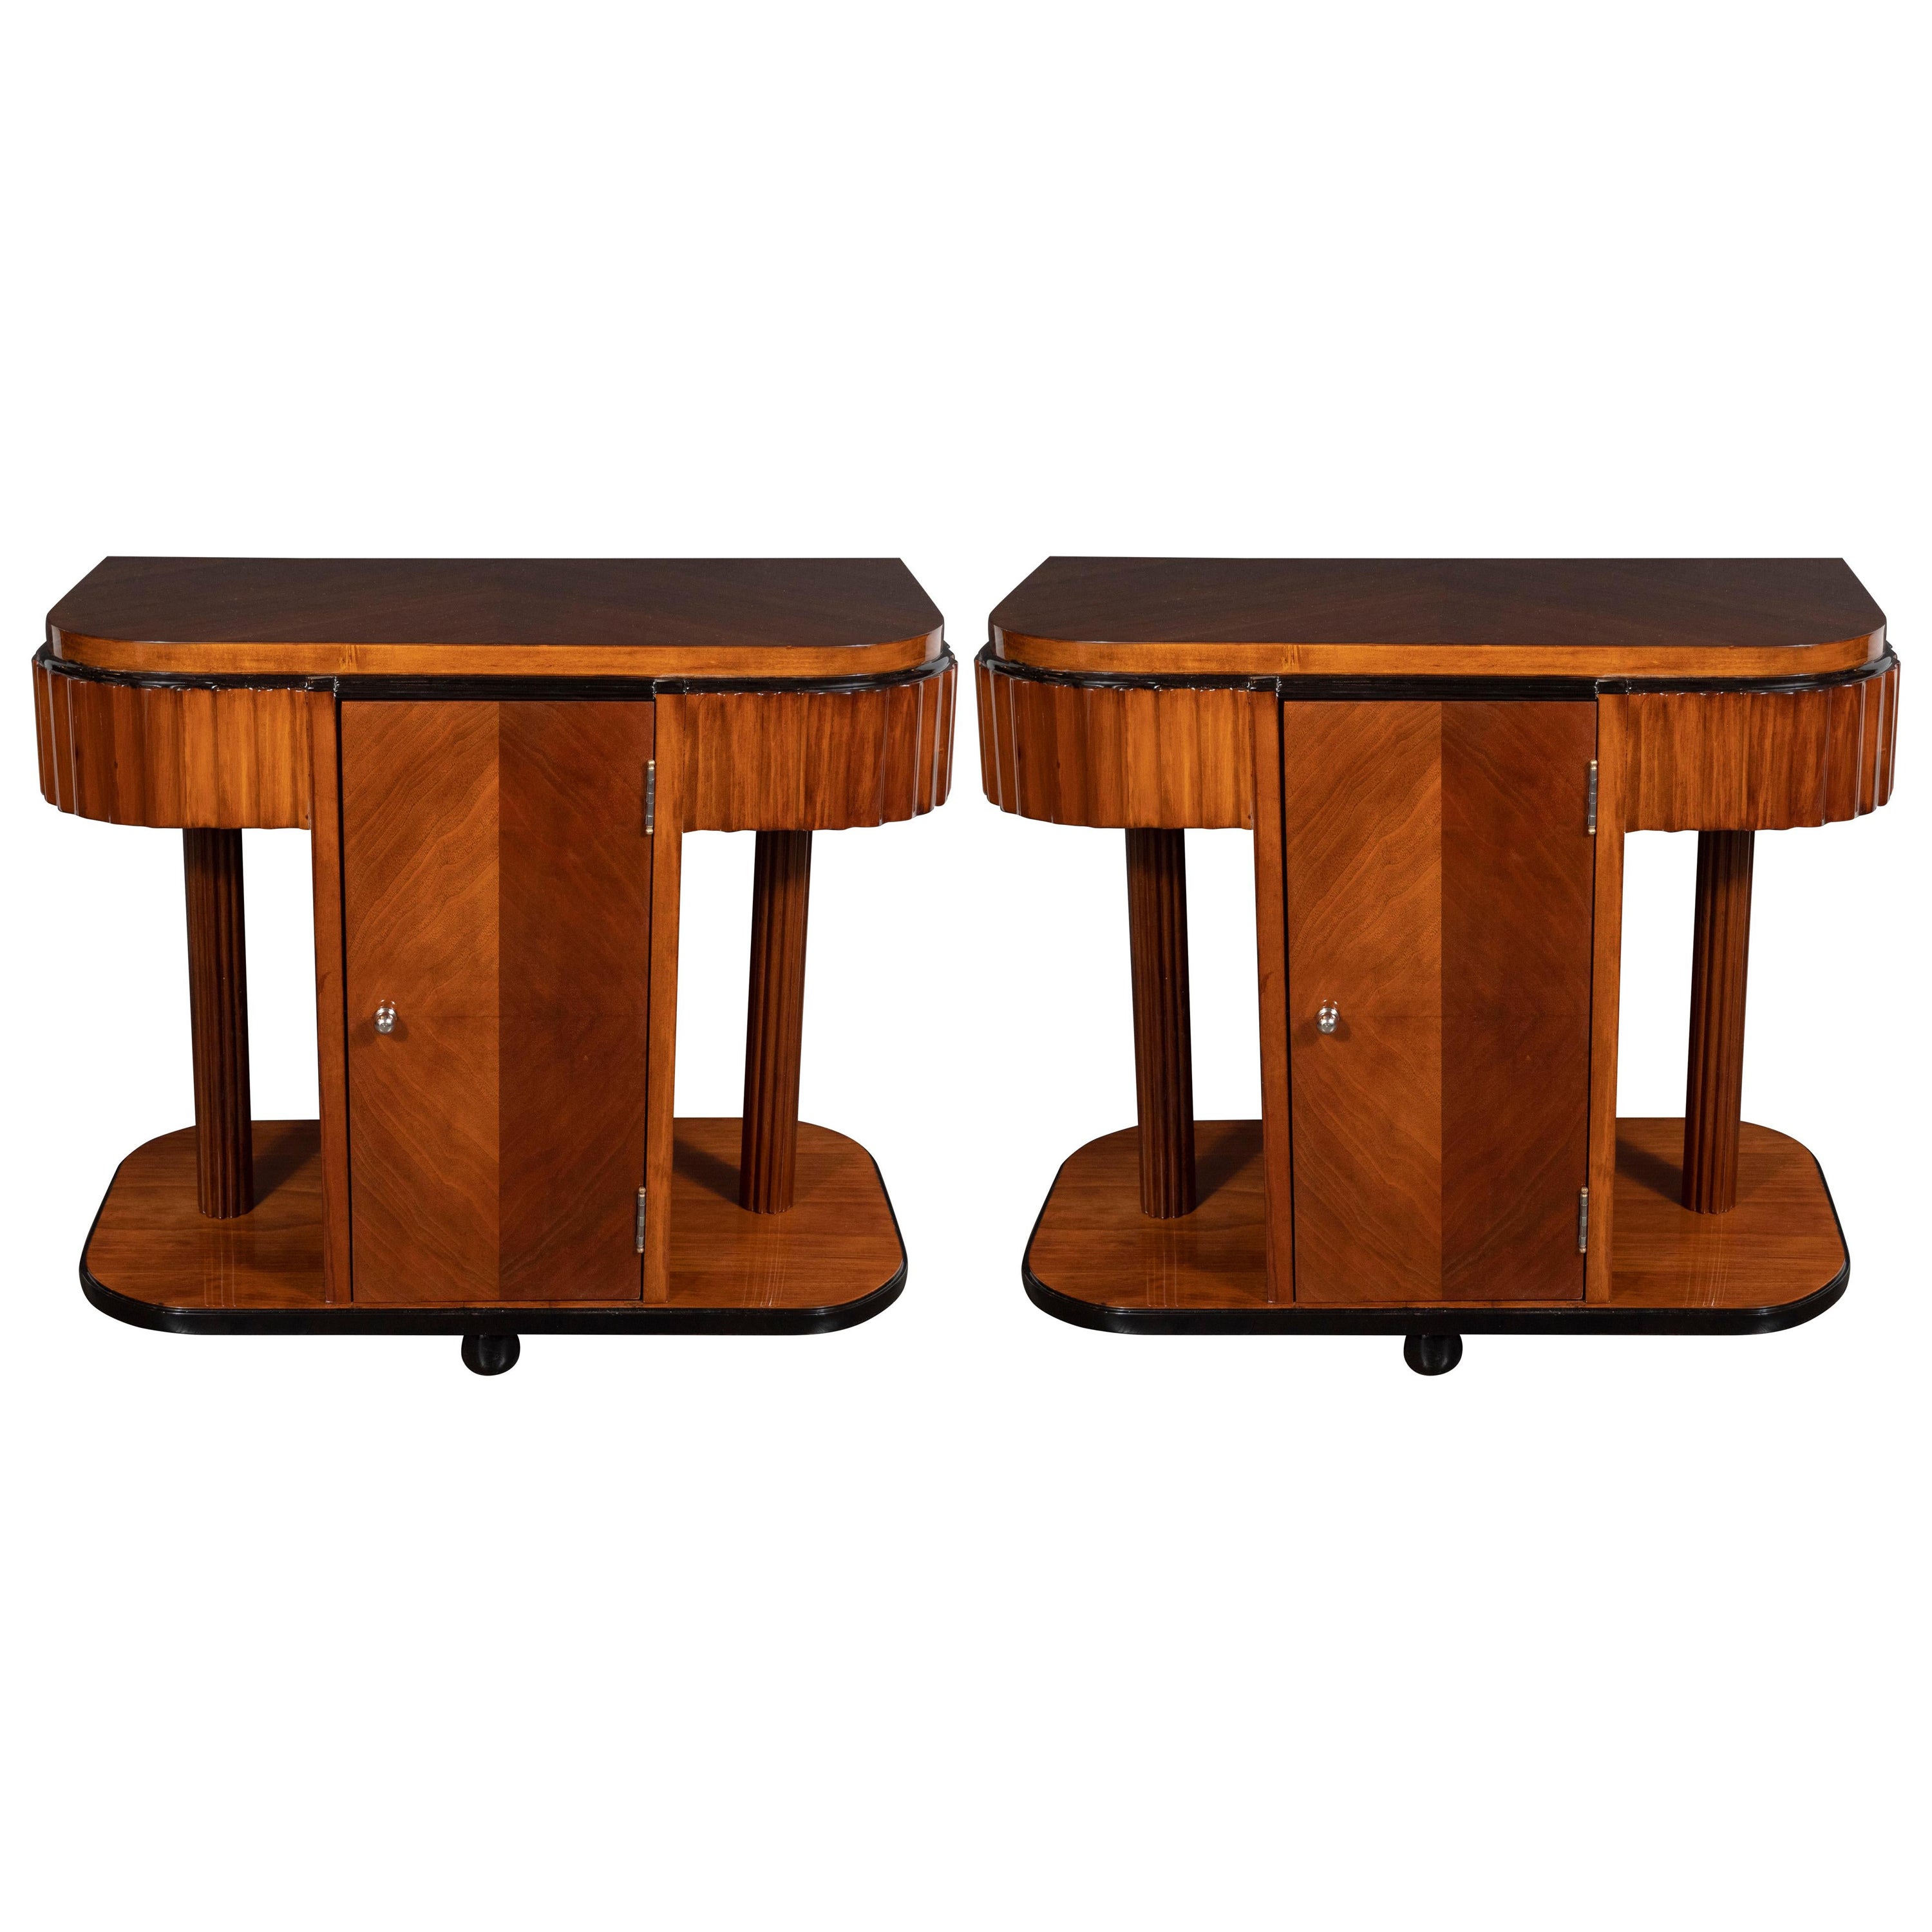 Pair of Art Deco Book-Matched Walnut and Black Lacquer Machine Age End Tables